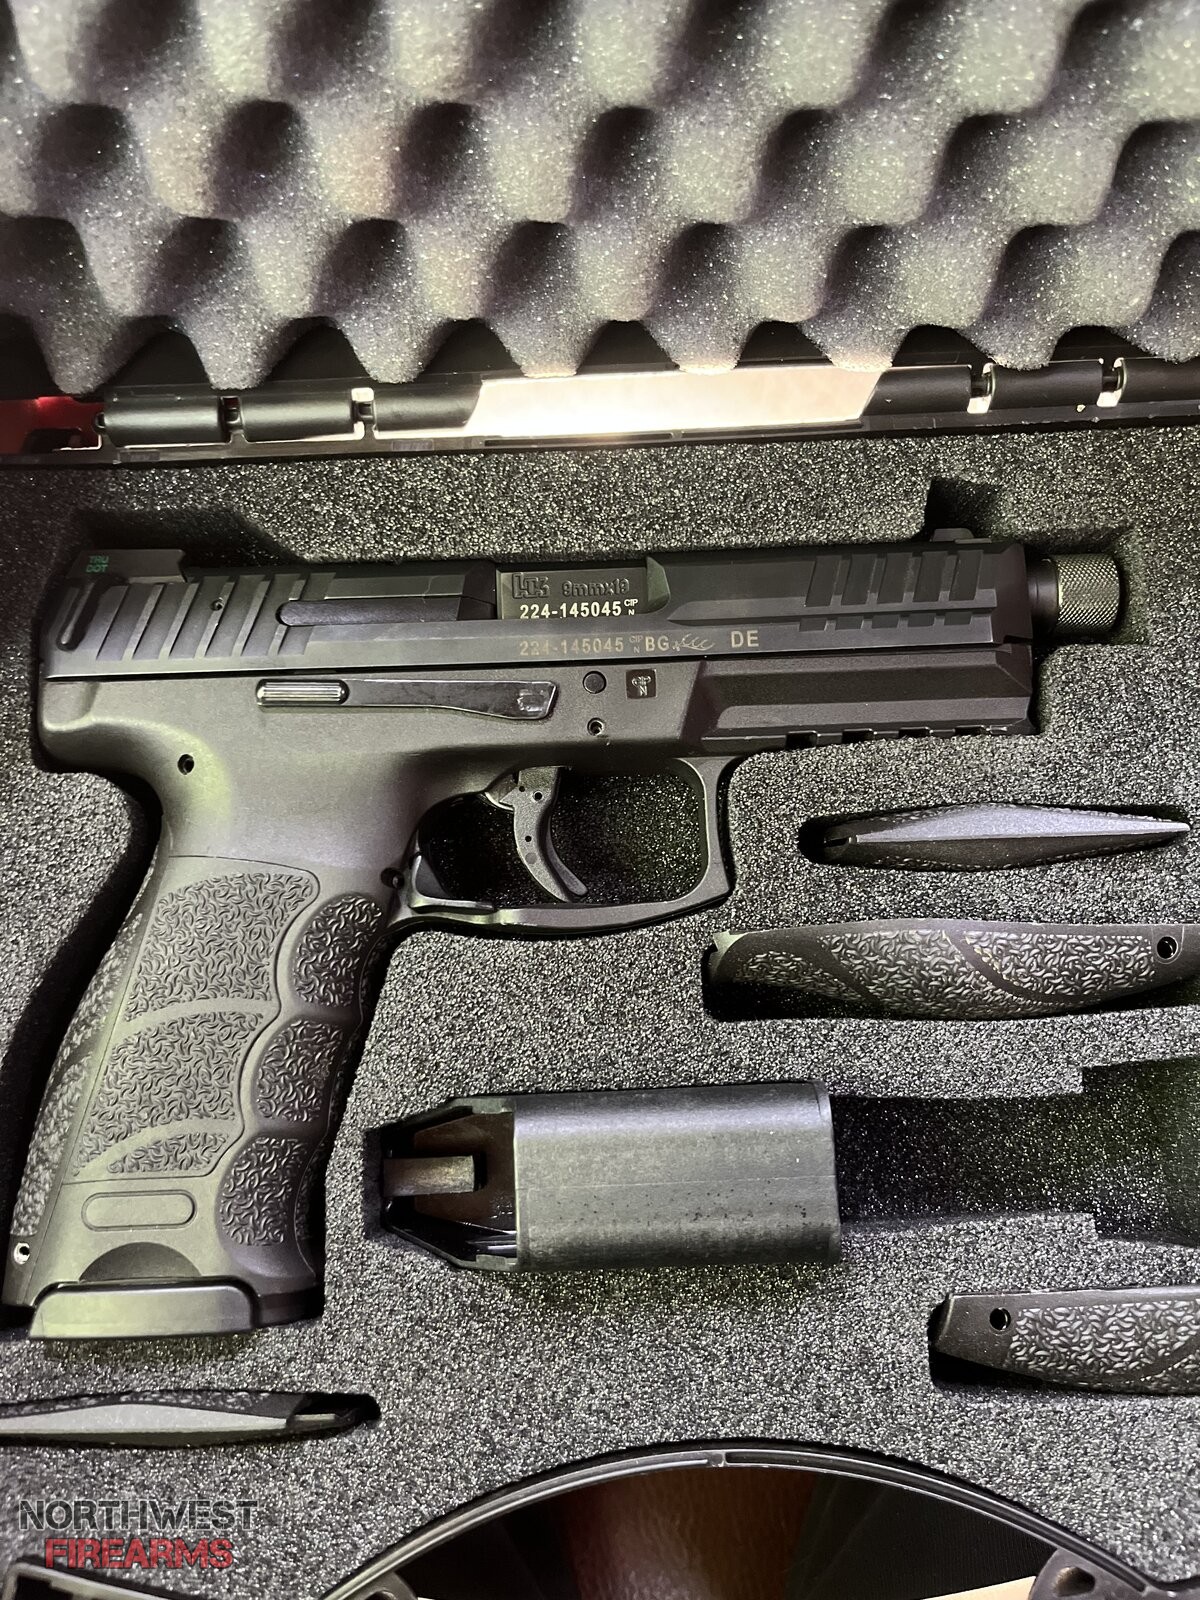 HK Vp9 tactical for sale | Northwest Firearms